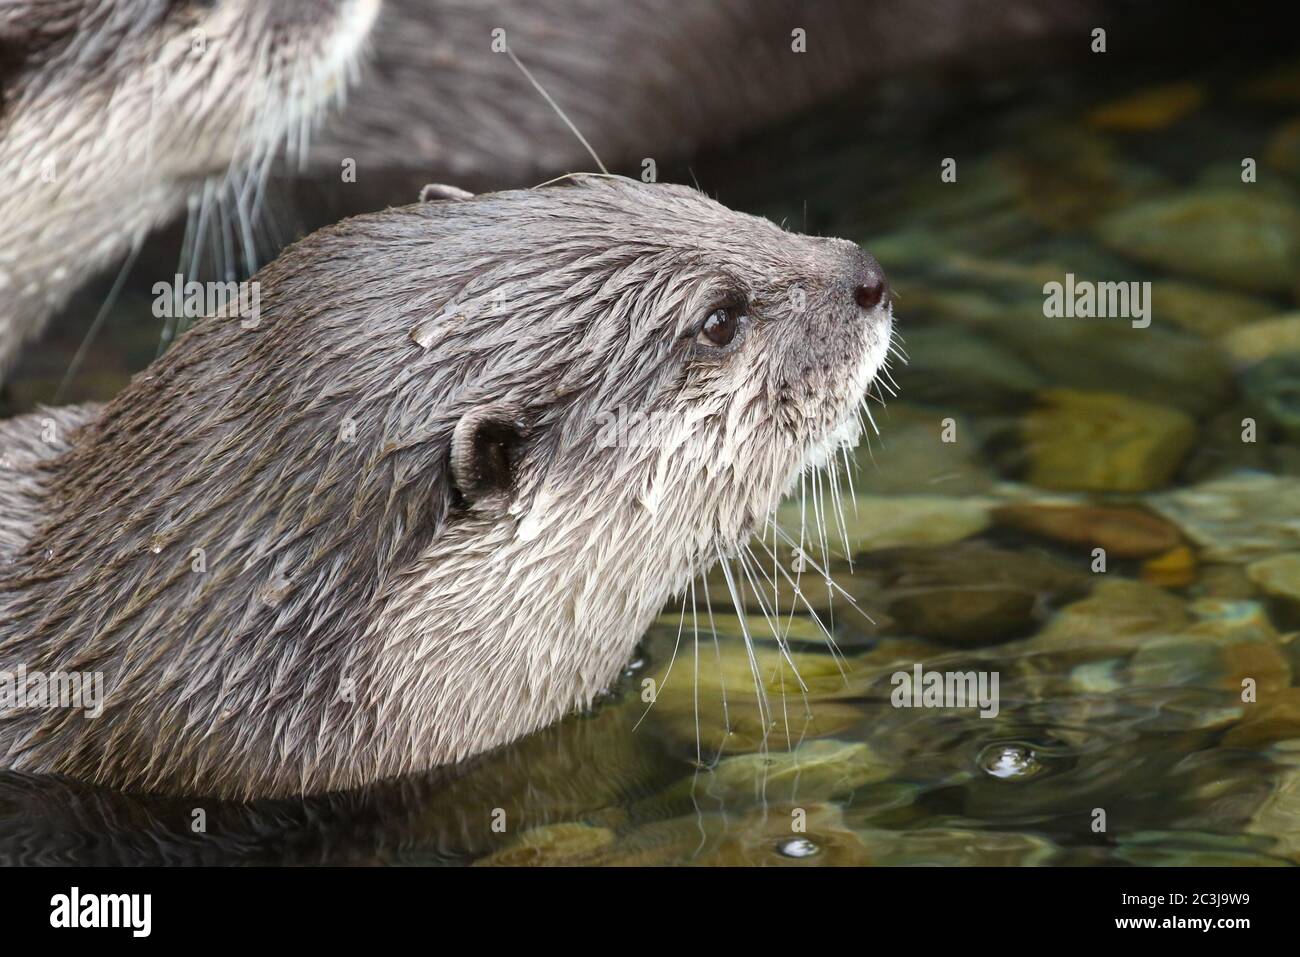 North American RIVER OTTER Lontra canadensis Stock Photo